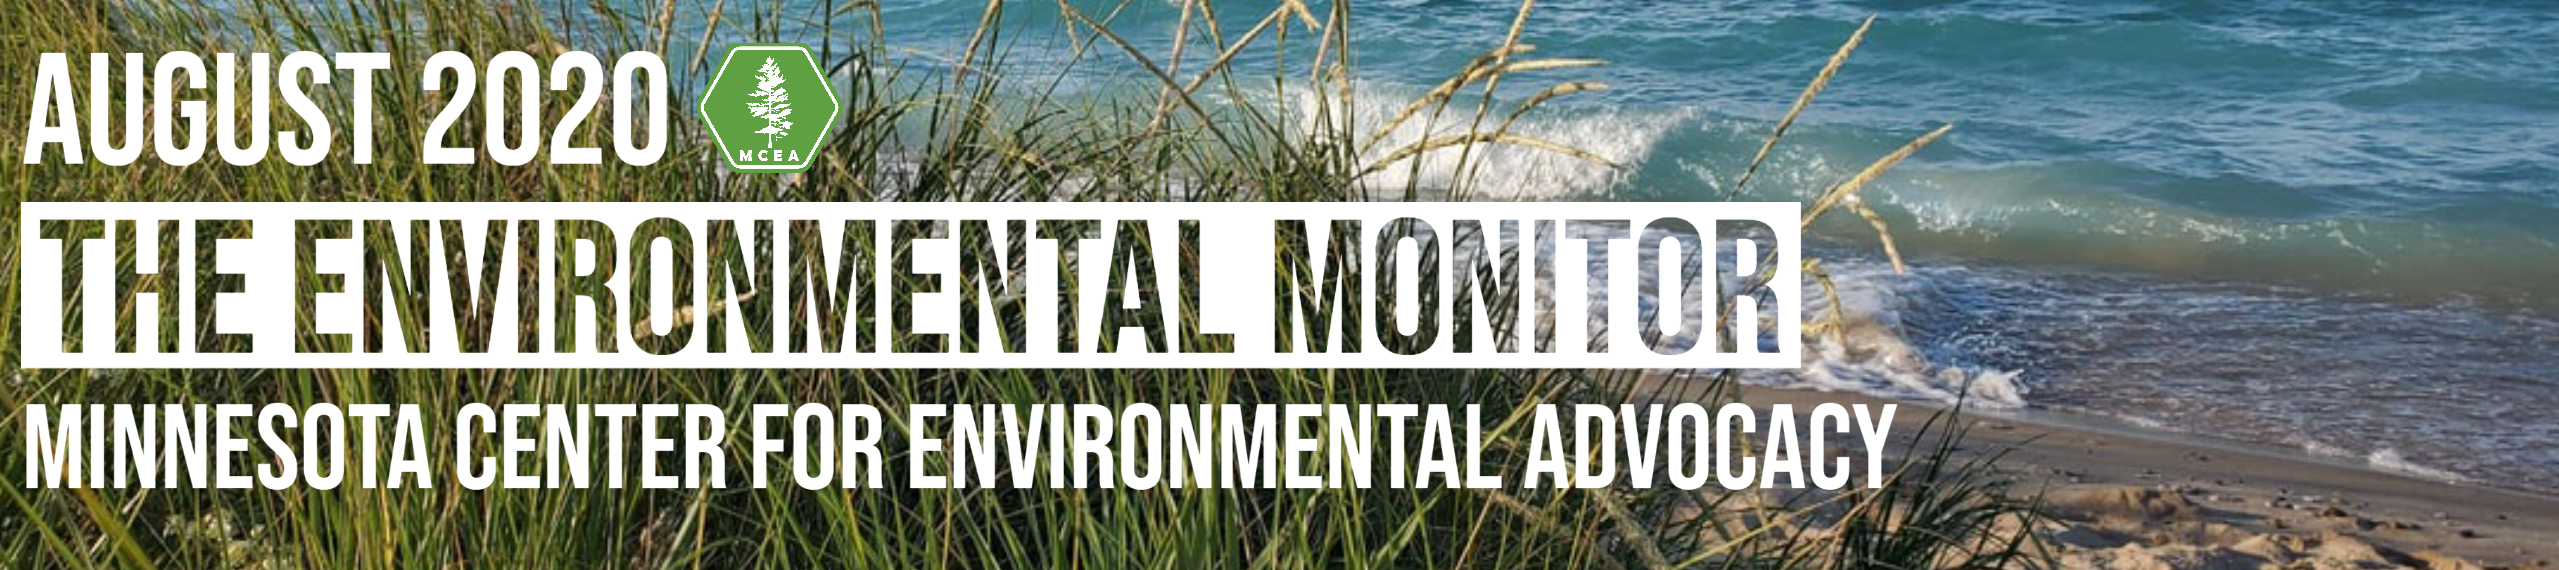 August 2020 The Environmental Monitor Minnesota Center for Environmental Advocacy